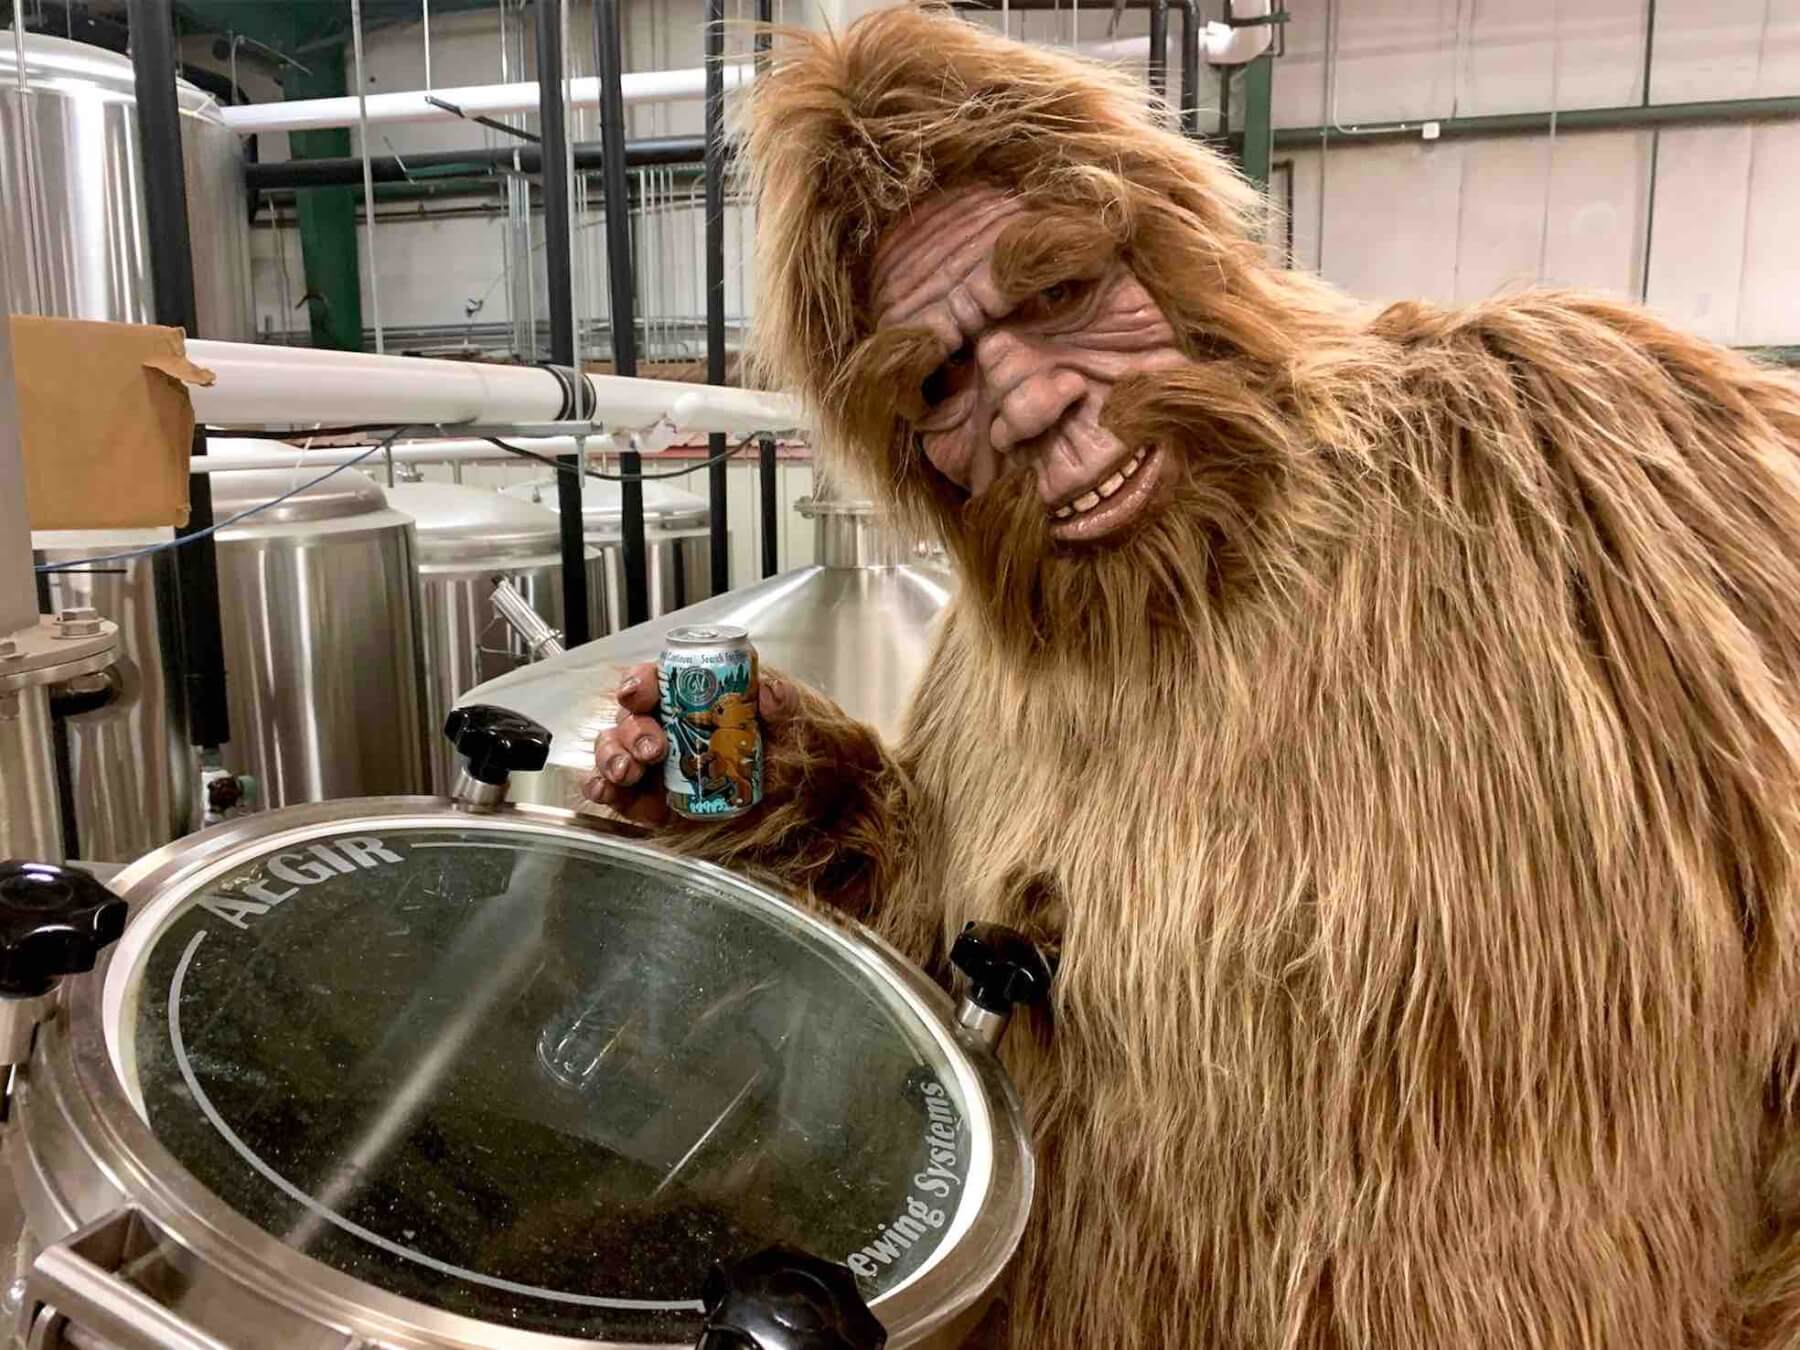 greenbrier valley brewing company west virginia made craft beer sasquatch on brewhouse